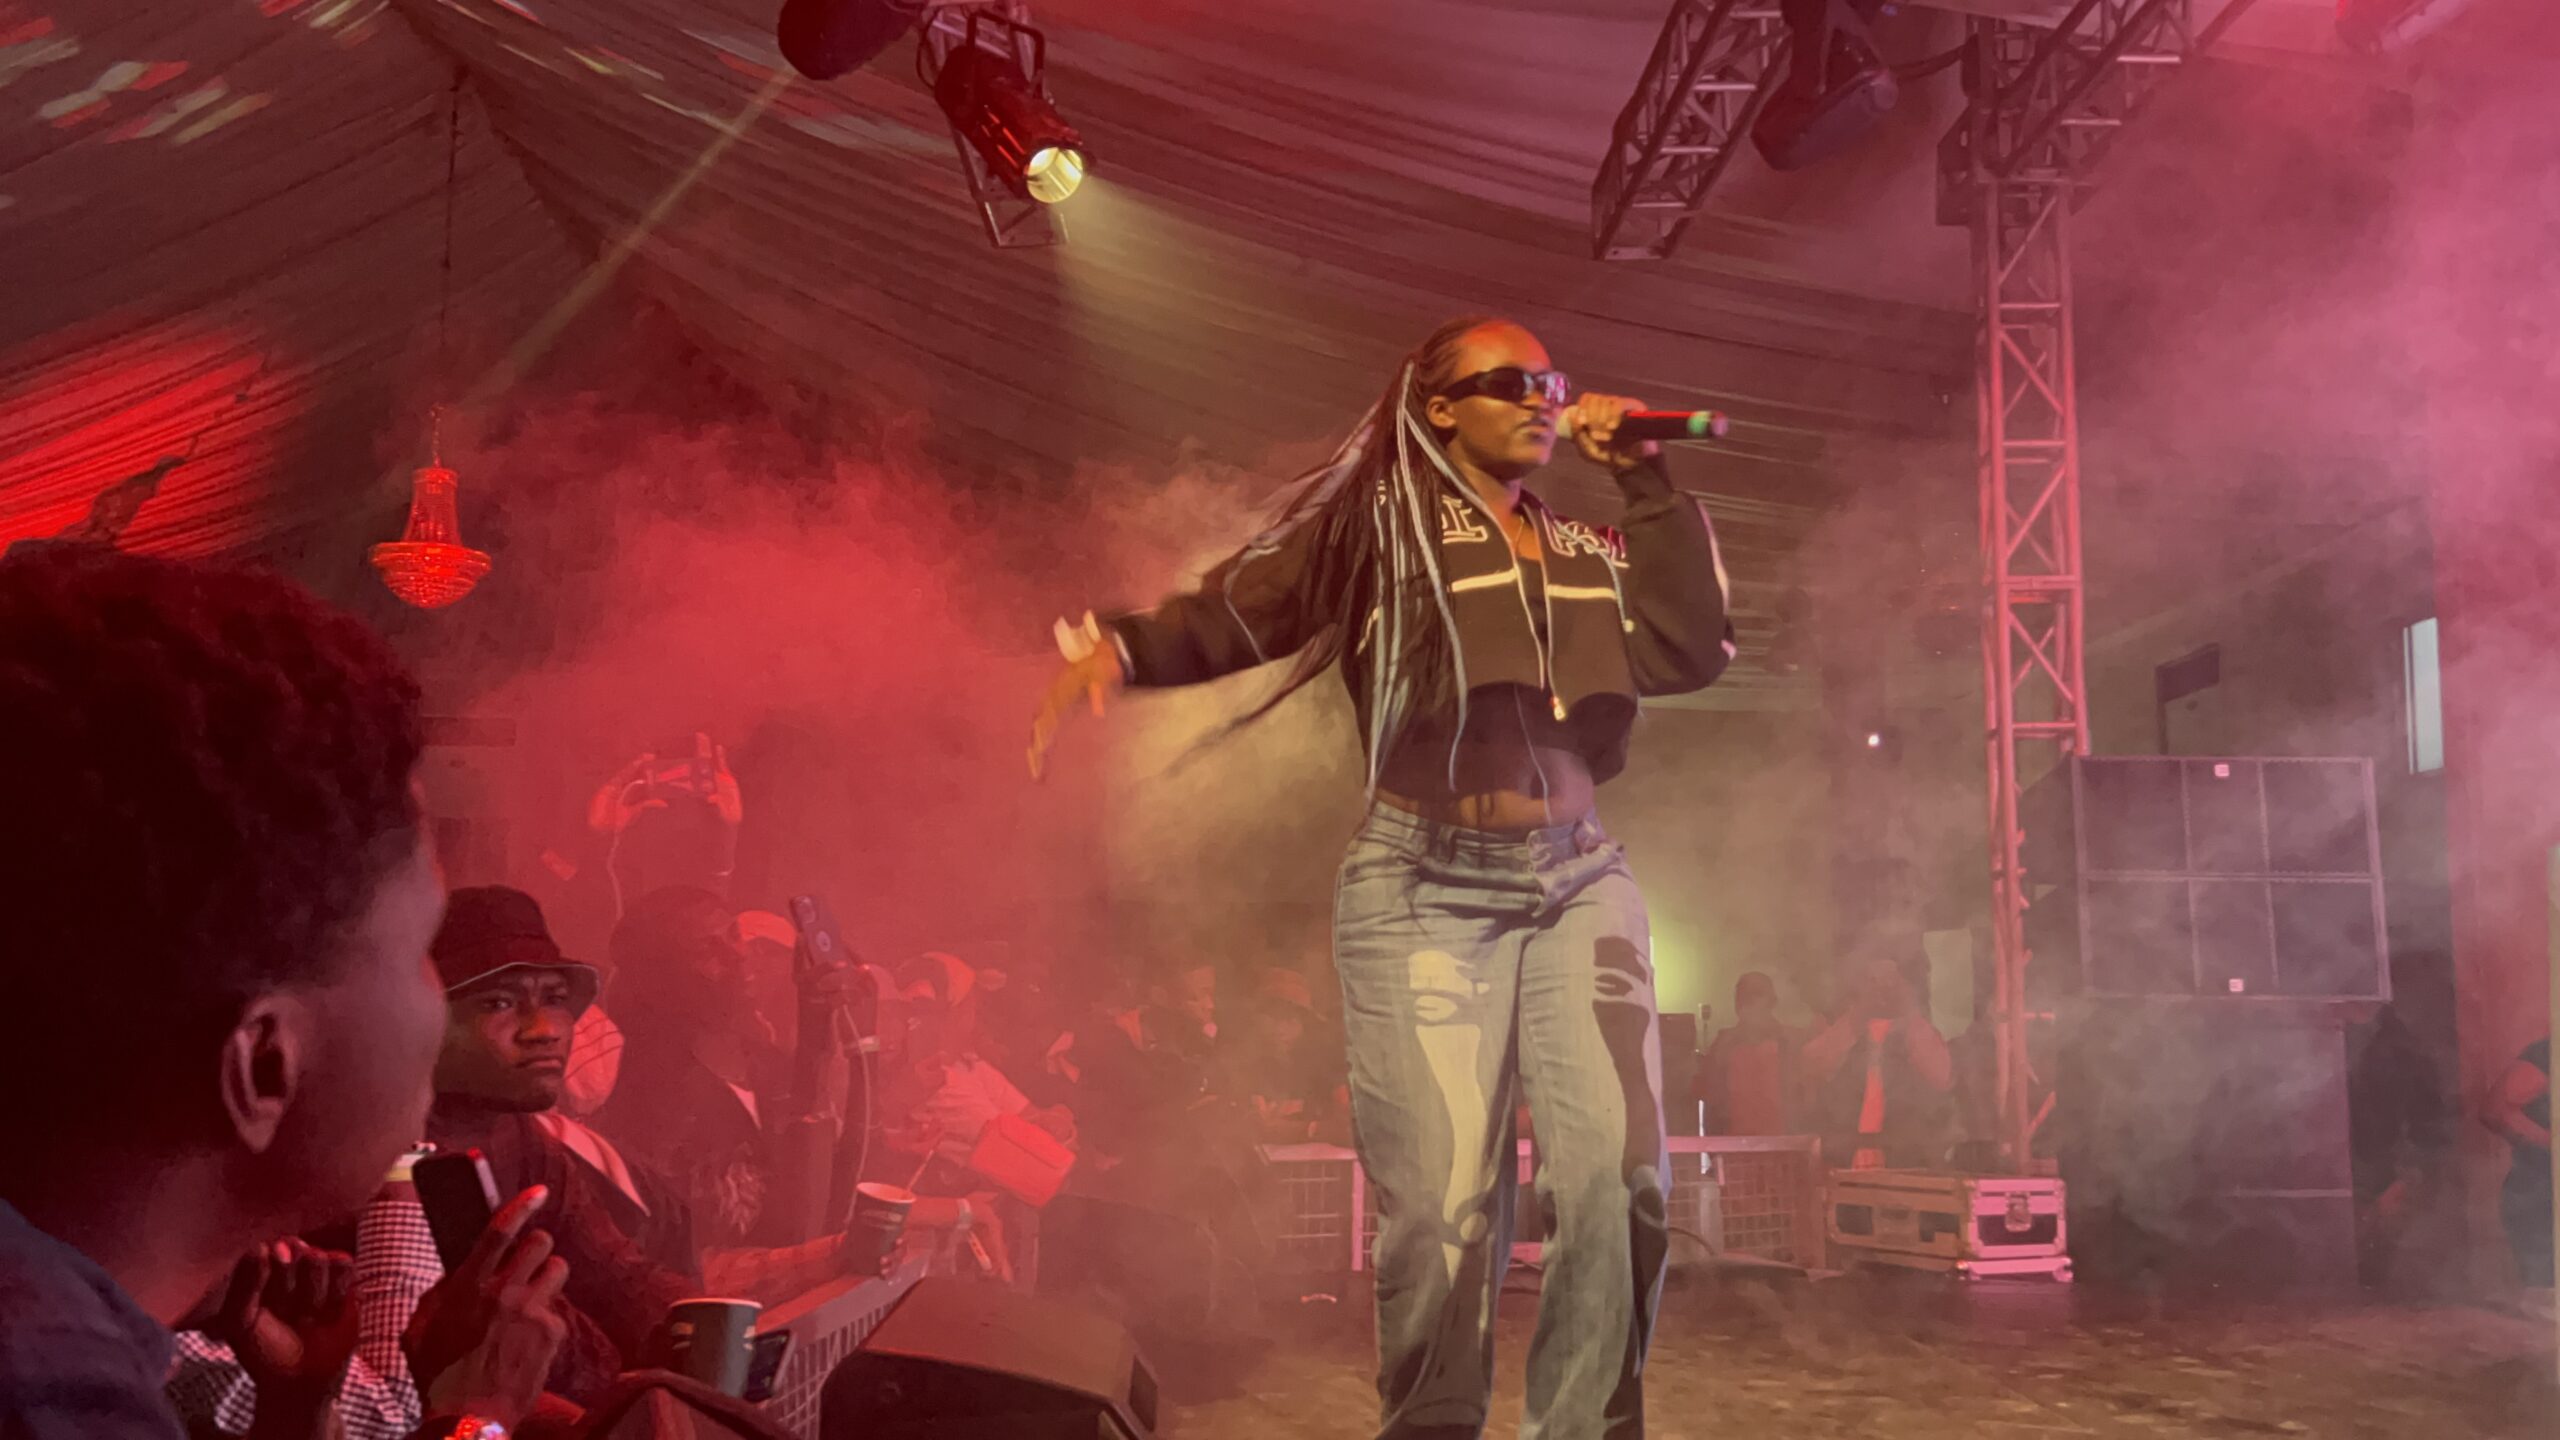 Raebel thrilling fans at Homecoming Festival held at the Harbour Point centre, in Victoria Island, Lagos